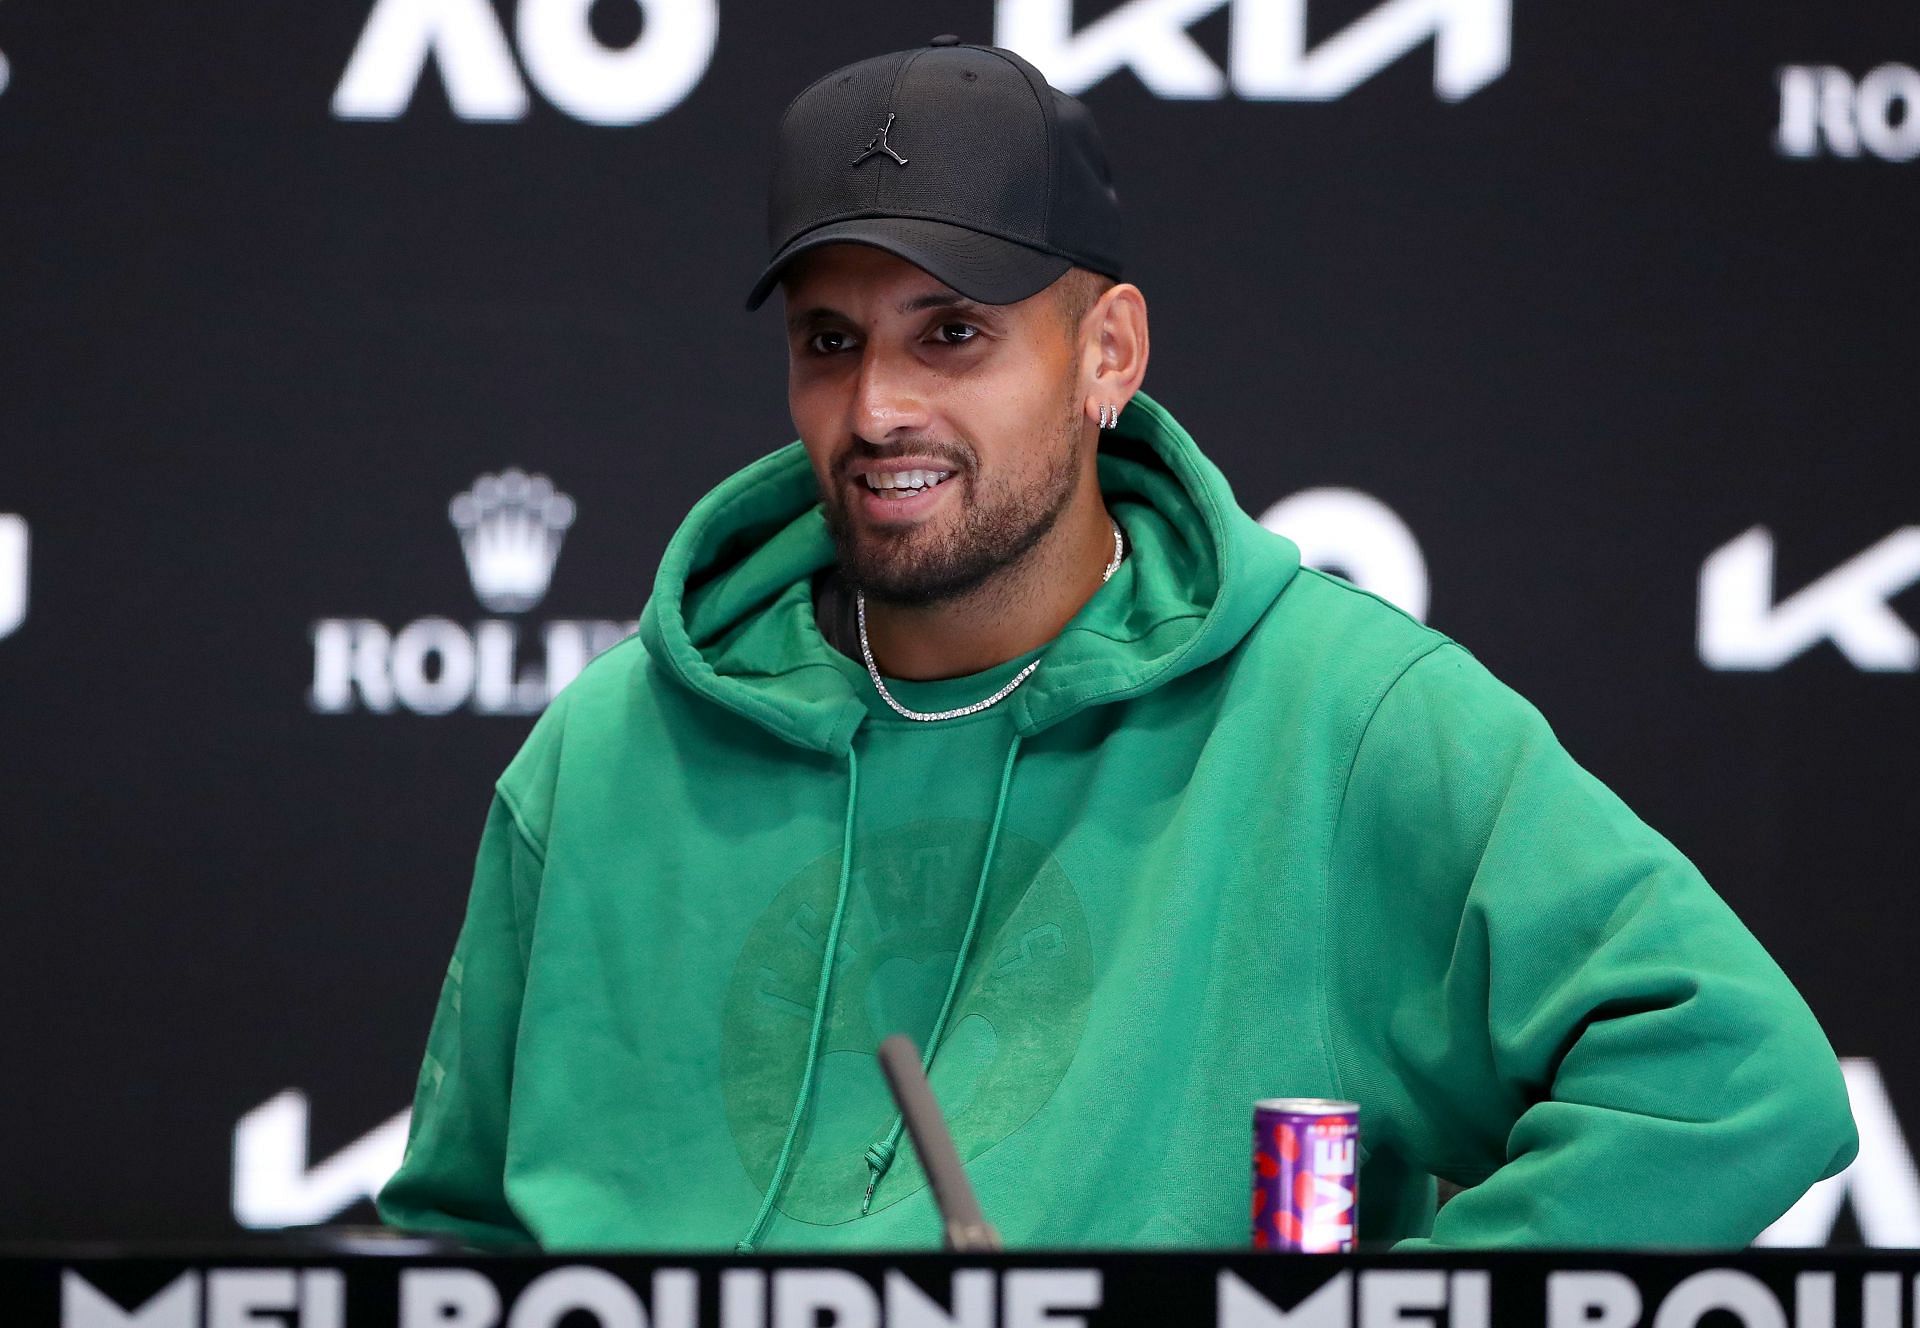 Nick Kyrgios shares heart-warming incident involving a fan from US Open 2021